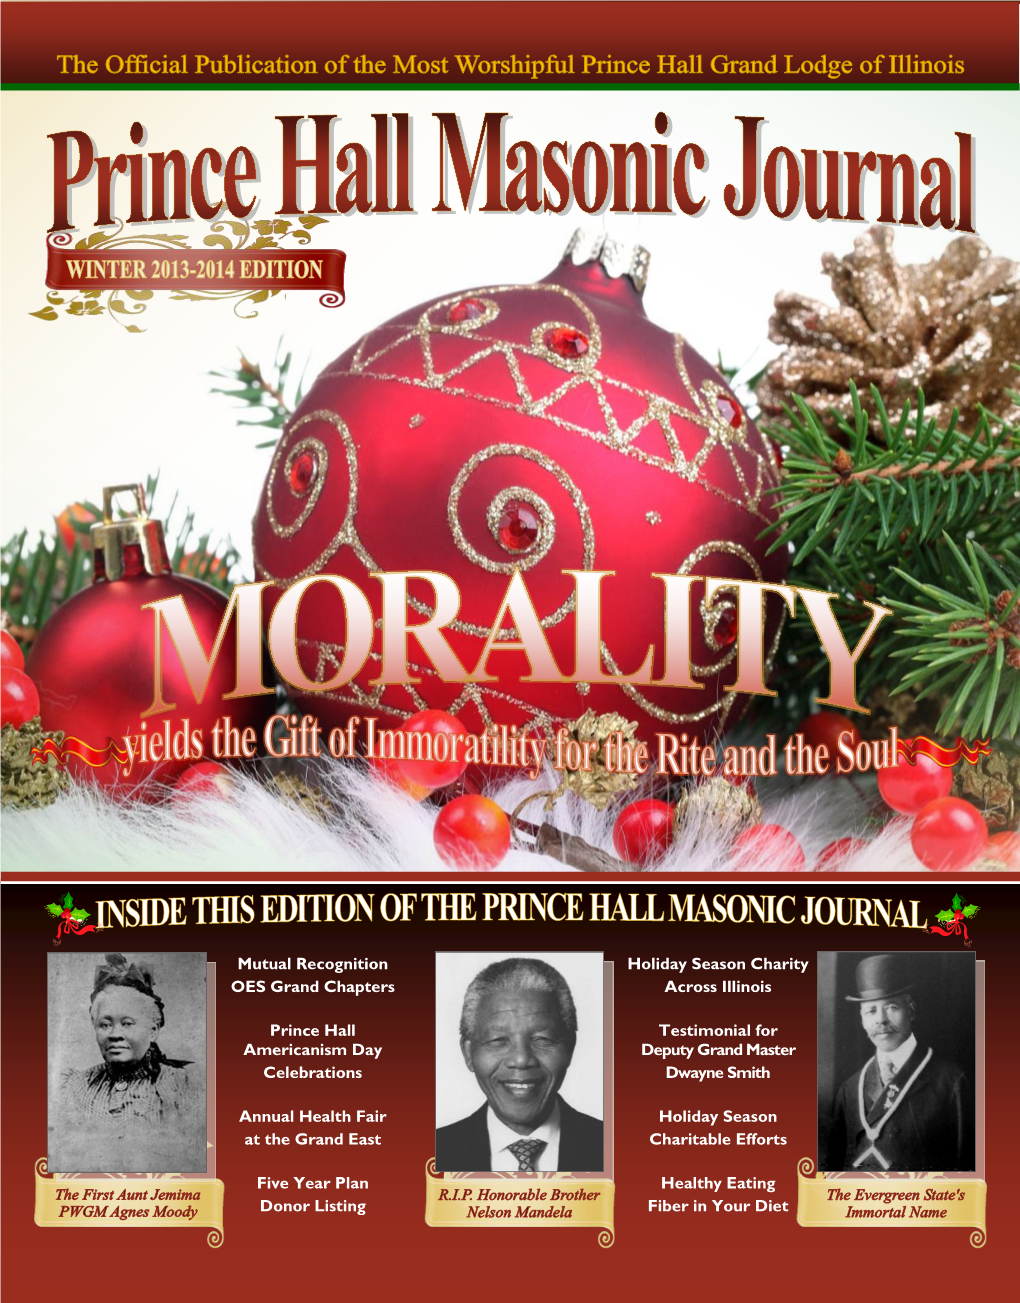 Mutual Recognition OES Grand Chapters Prince Hall Americanism